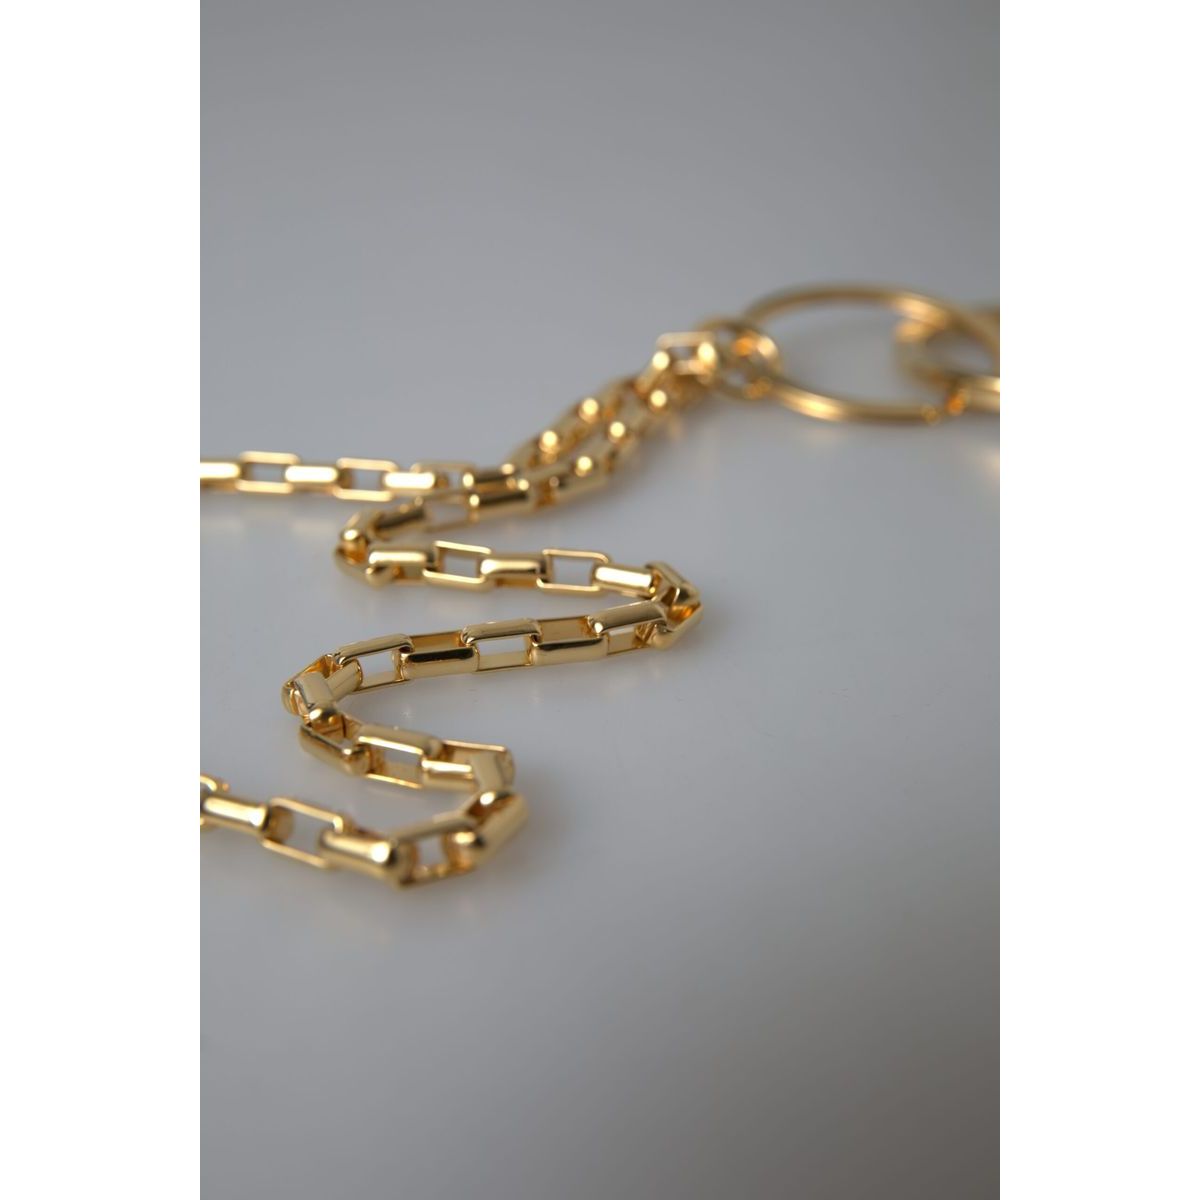 Dolce & Gabbana Chic Gold Charm Chain Necklace gold-tone-brass-chain-link-dg-logo-pendant-necklace